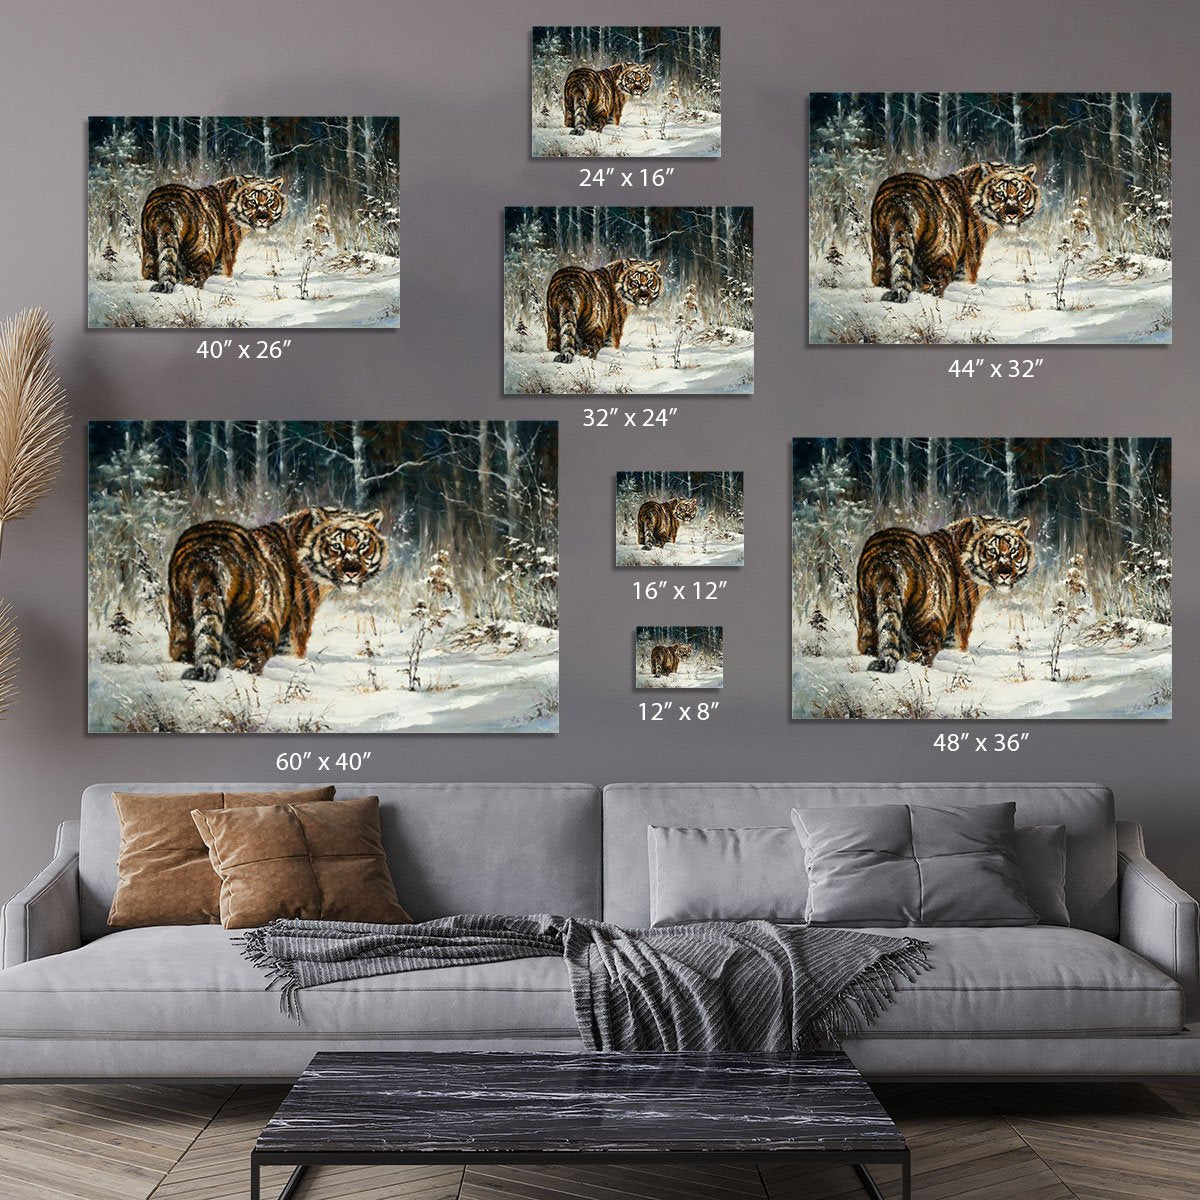 Landscape with a tiger in winter wood Canvas Print or Poster